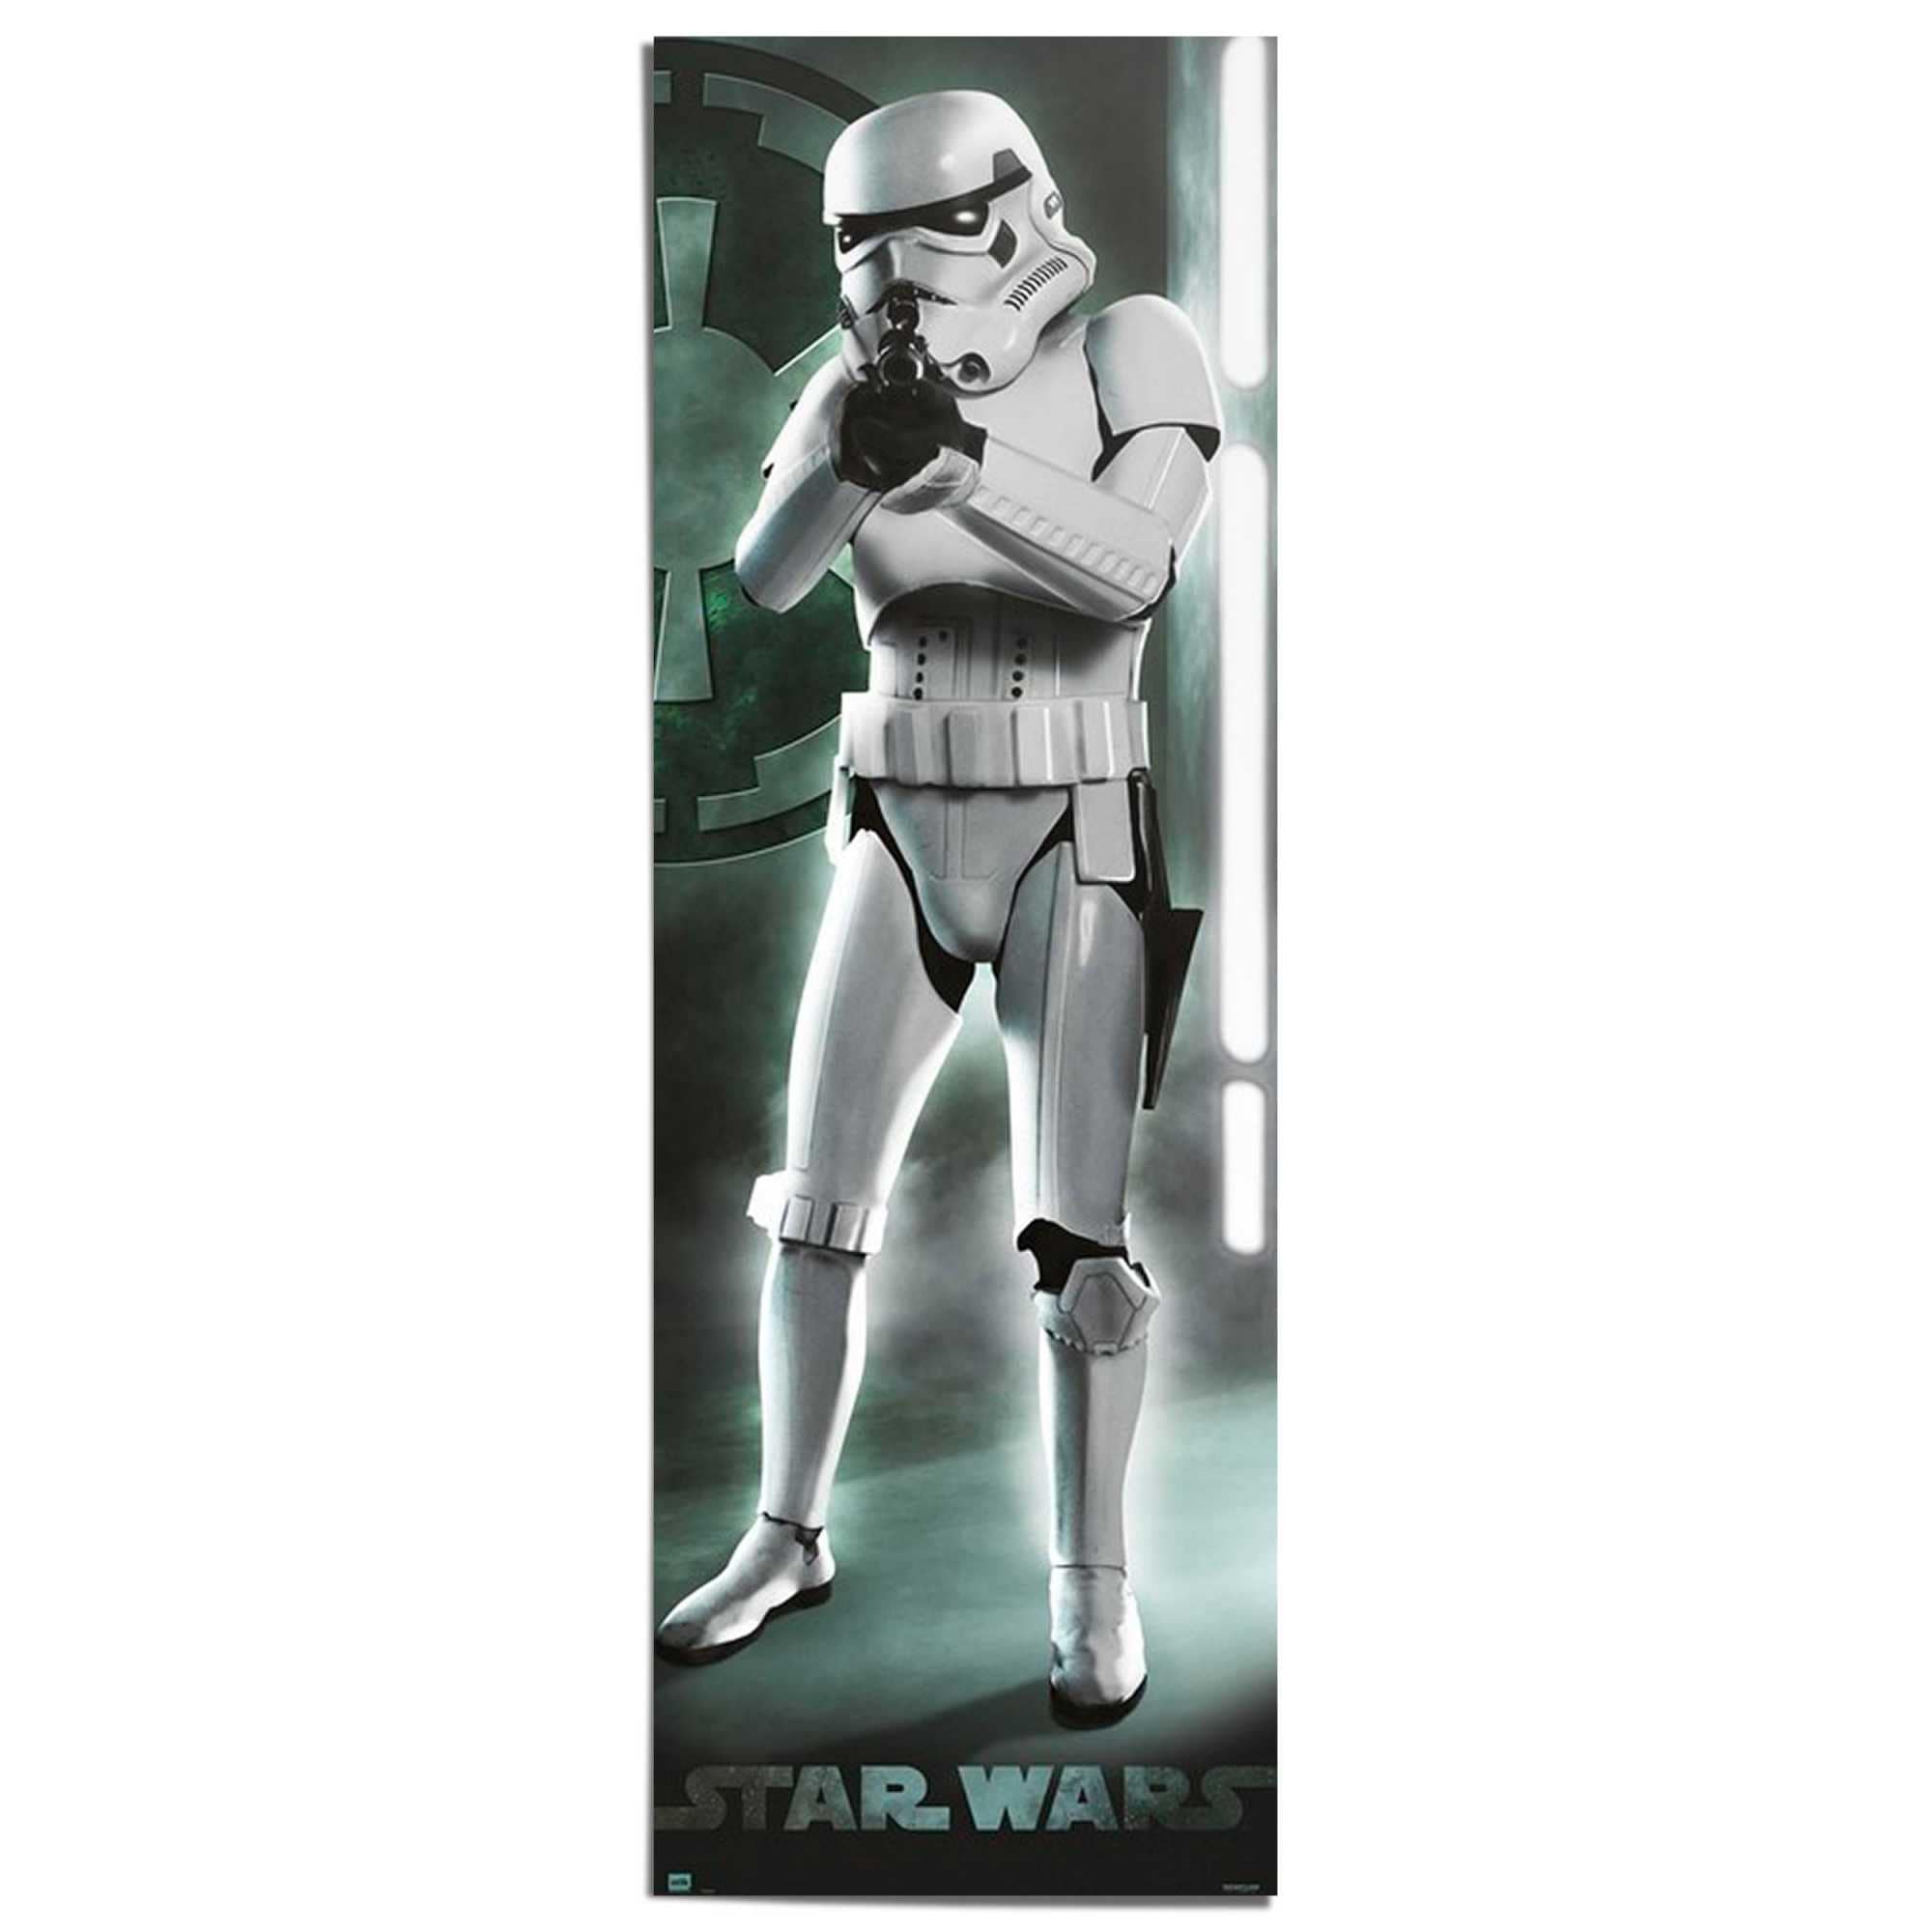 Poster »Star Wars - classic soldier«